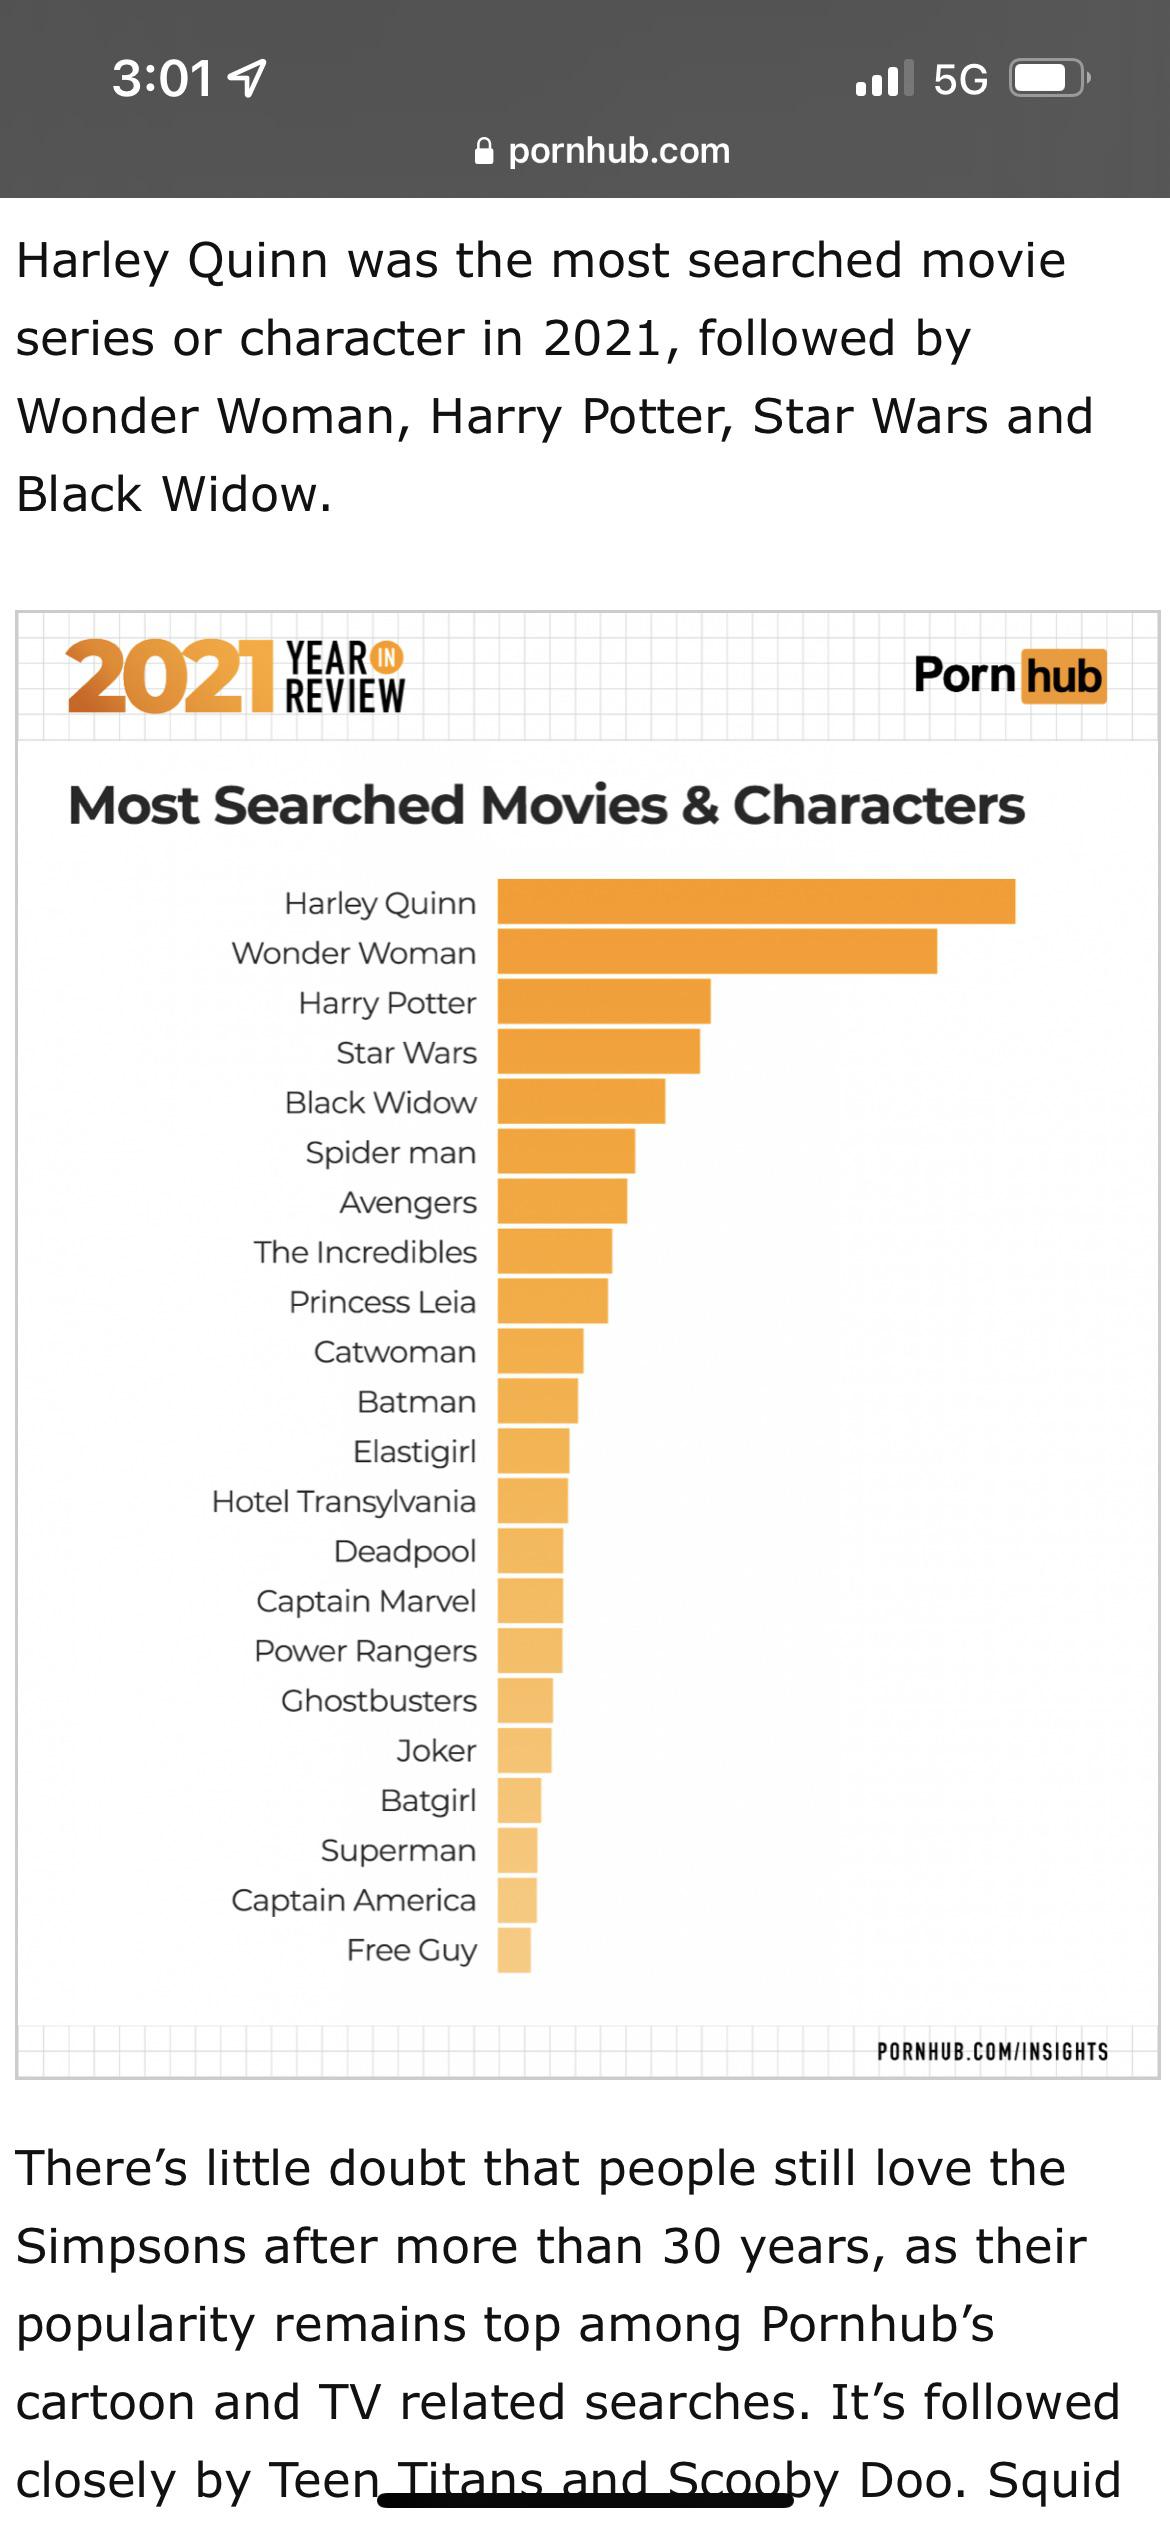 When free guy is in the top 25 pornhub movie/character searchers ...